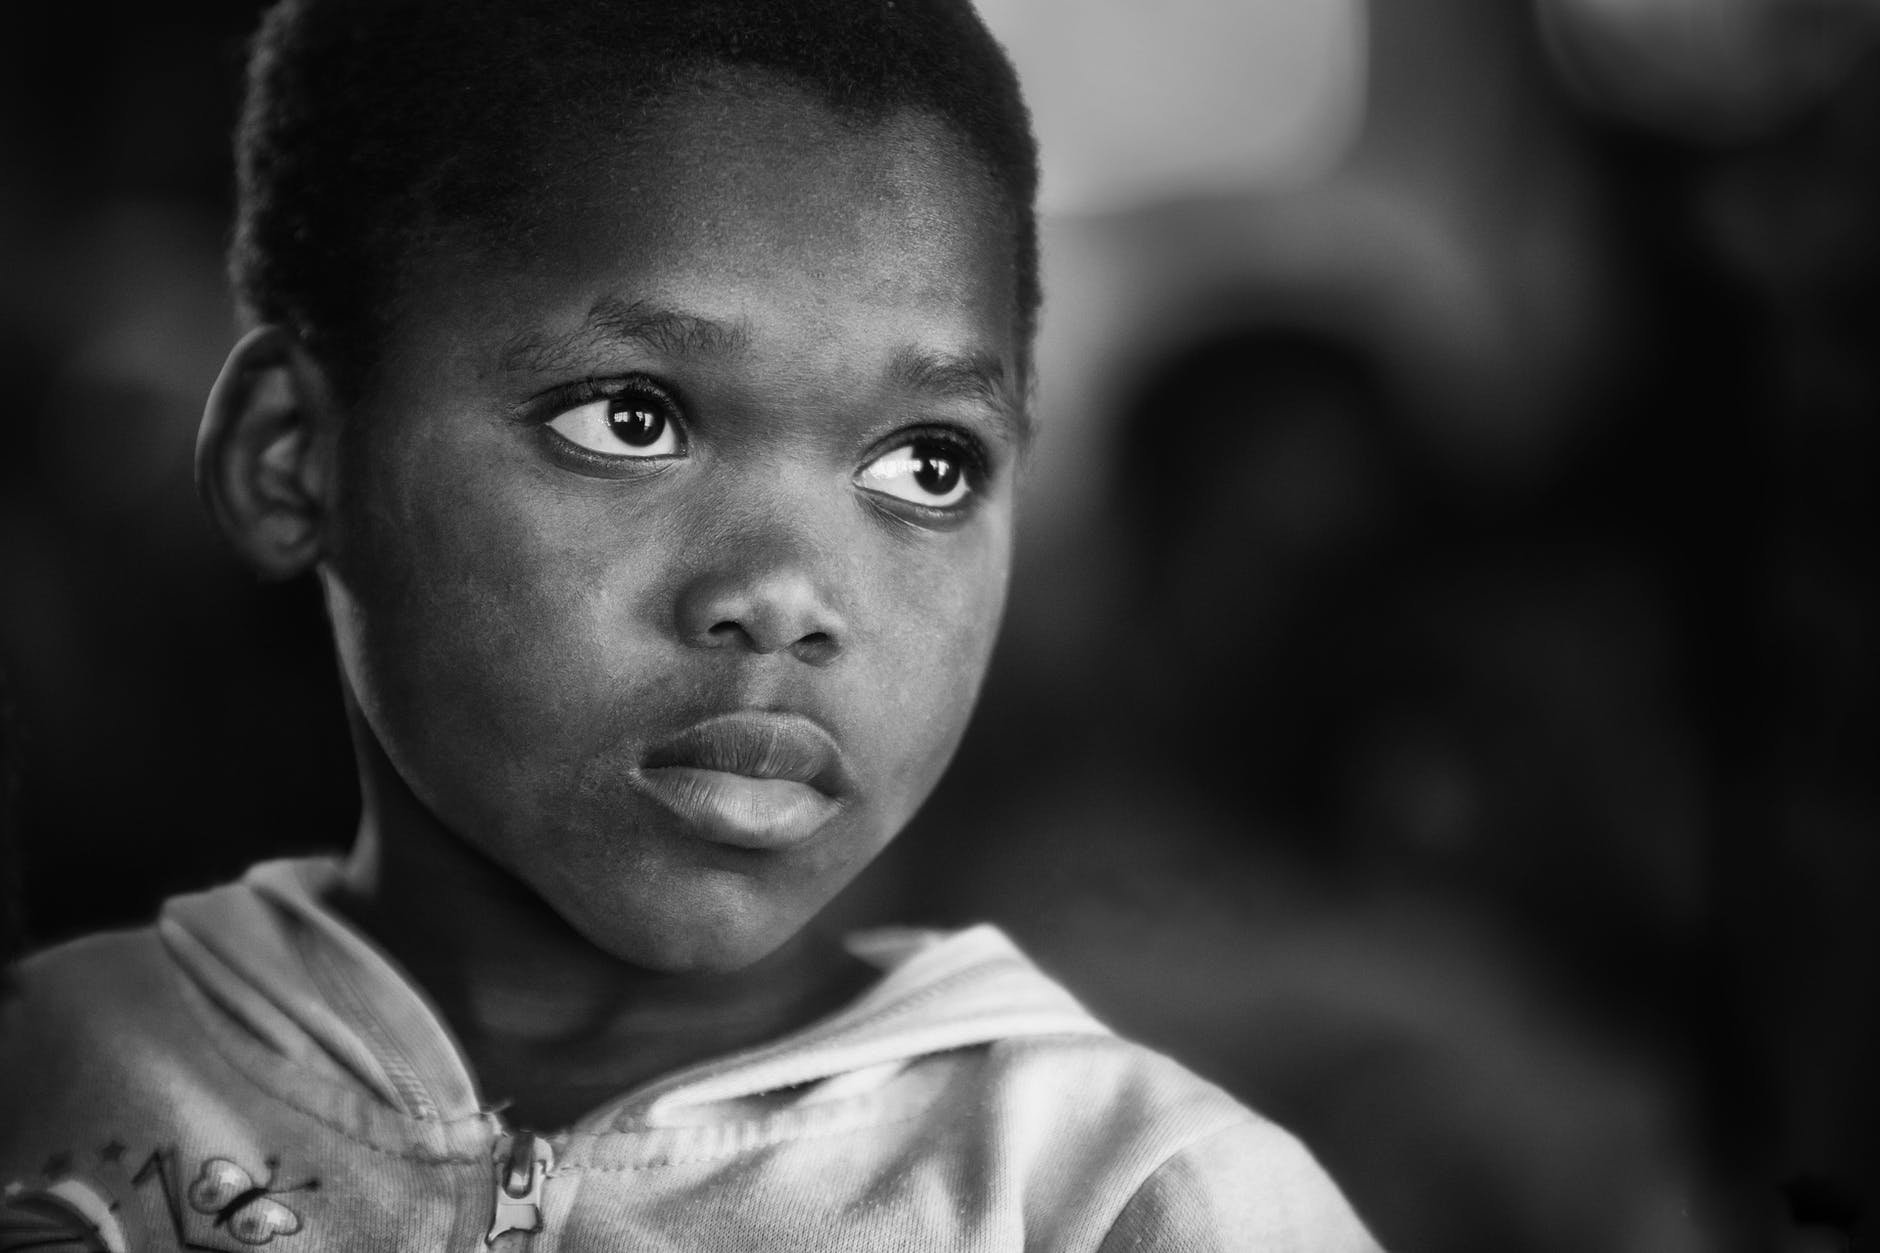 A Black child stares past the camera into the distance.